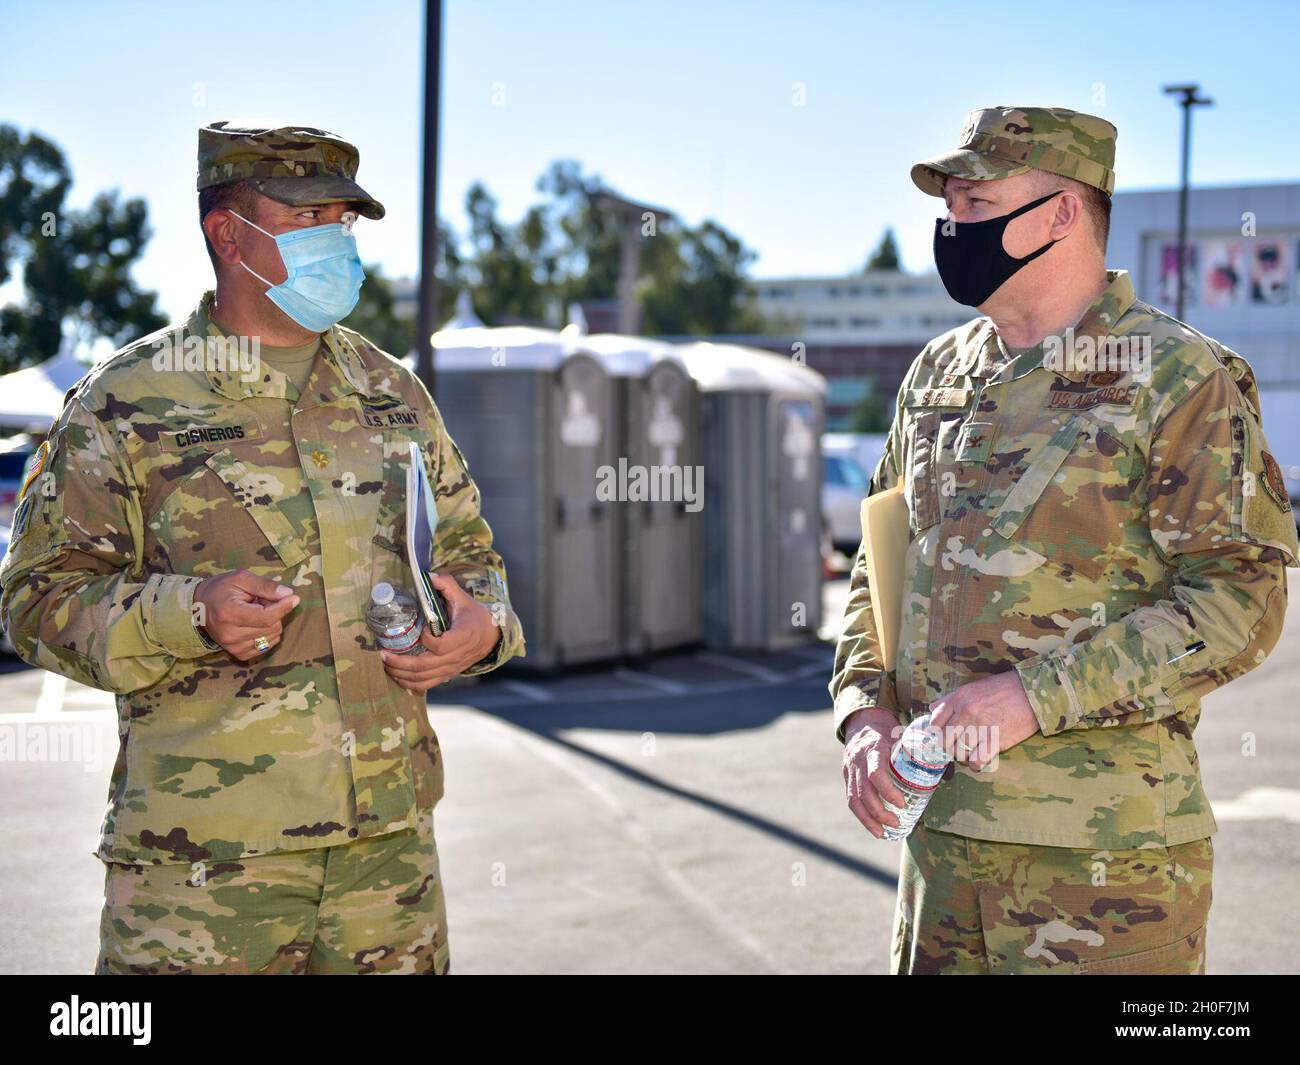 U.S. Air Force Col. Robert Sage, right, commander of the 195th Wing, California National Guard, speaks with U.S. Army Maj. Leroy Cisneros, commander of Joint Task Force Mustang, California National Guard, speak in front of the drive-thru site of the COVID-19 community vaccination center at Cal State Los Angeles, Feb. 23, 2021. Over 30 Airmen from the wing have been activated as part of the joint force to provide administrative support to the vaccination efforts. Stock Photo